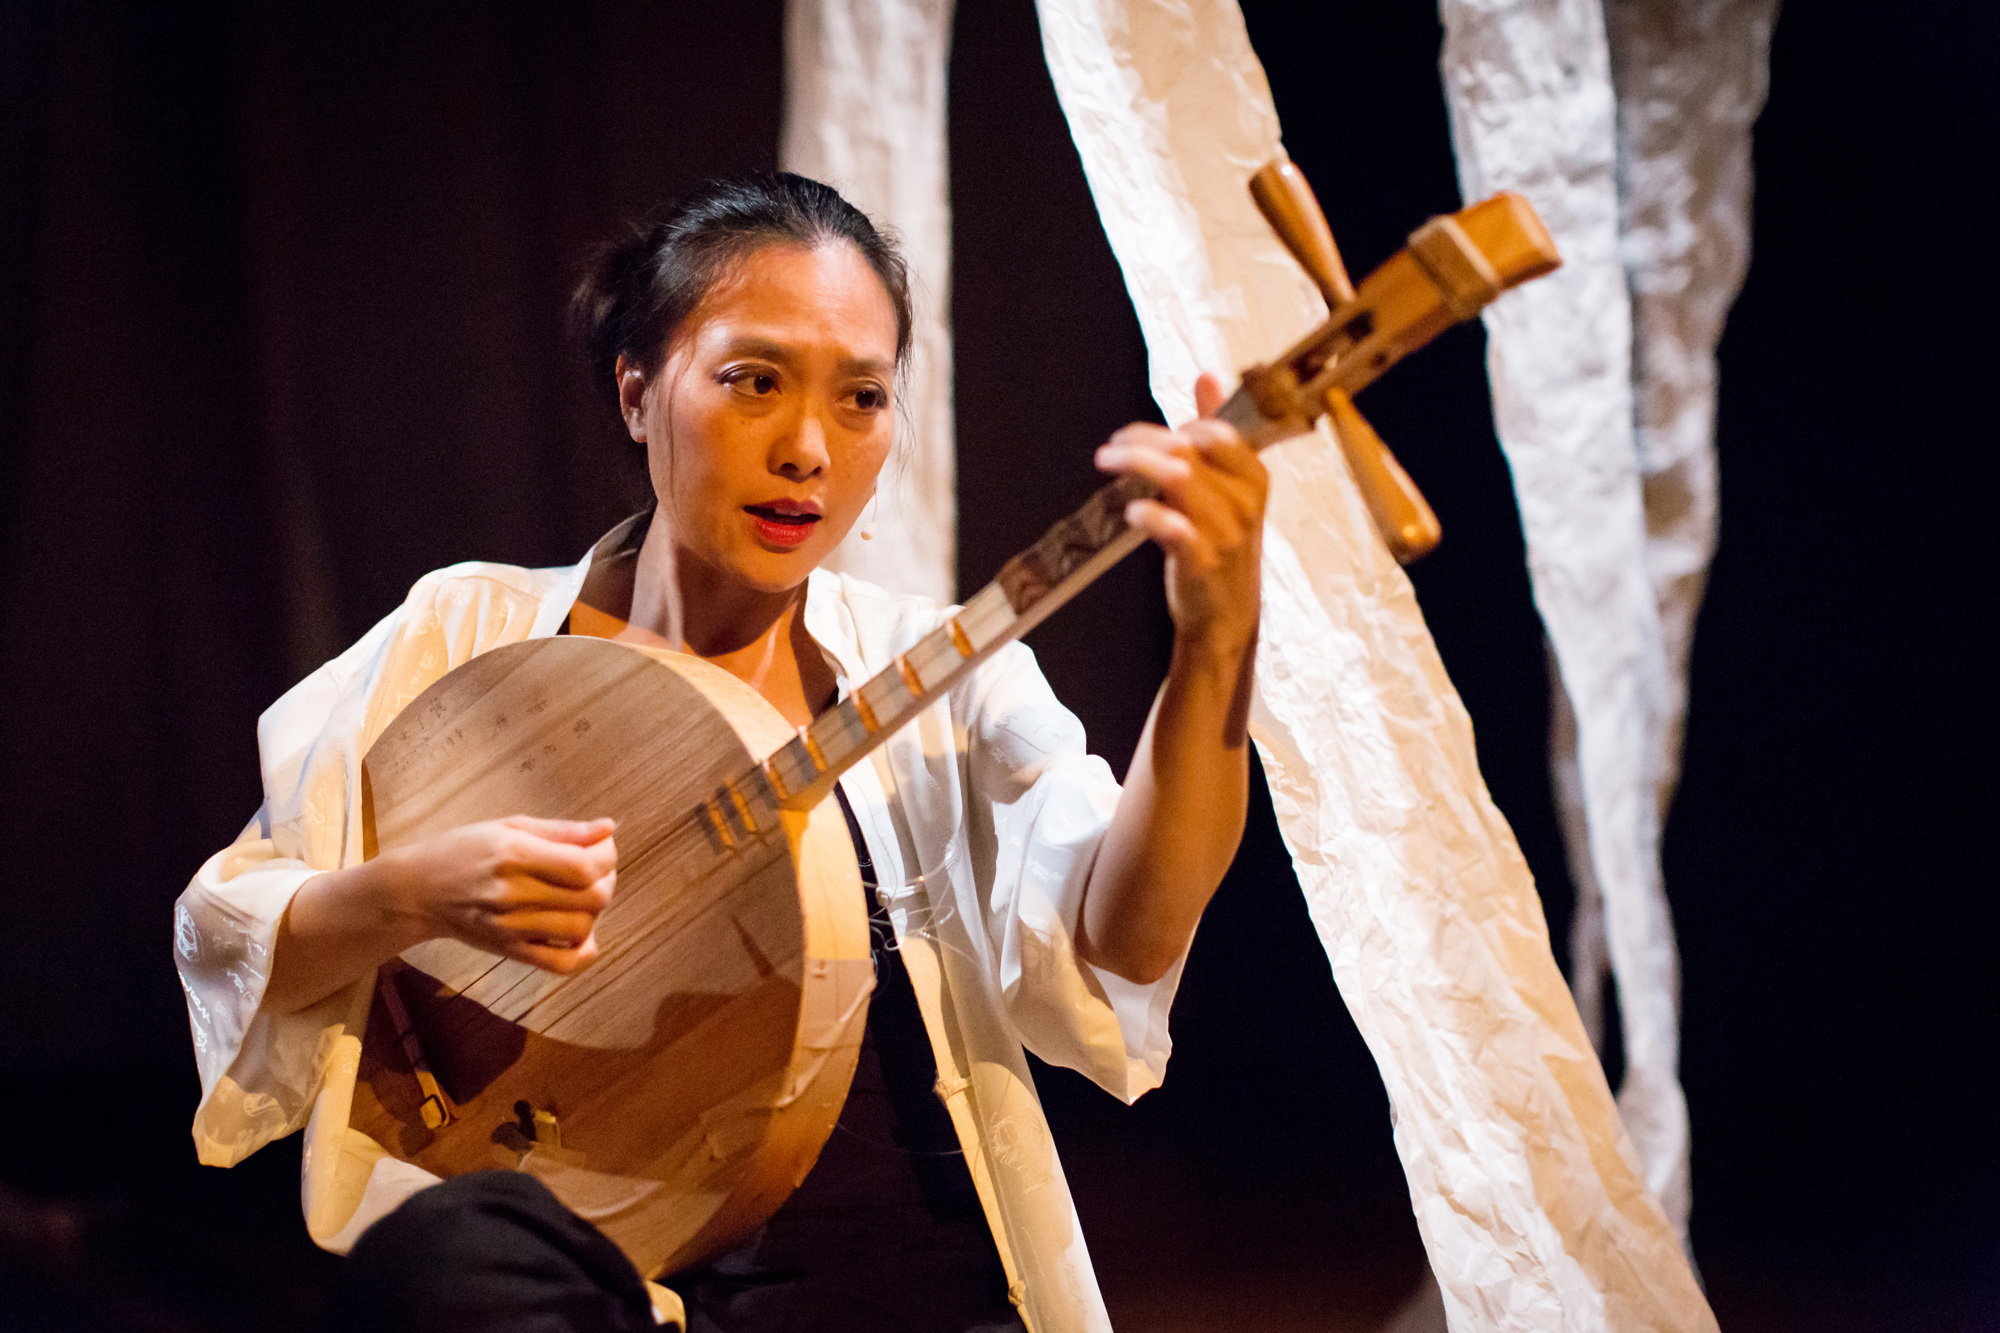 Jen Shyu is a composer, multi-instrumentalist, dancer and vocalist who will perform “Nine Doors” at 8 p.m. Jan. 18 at Club Sudakoff. Photo courtesy Lynn Lane